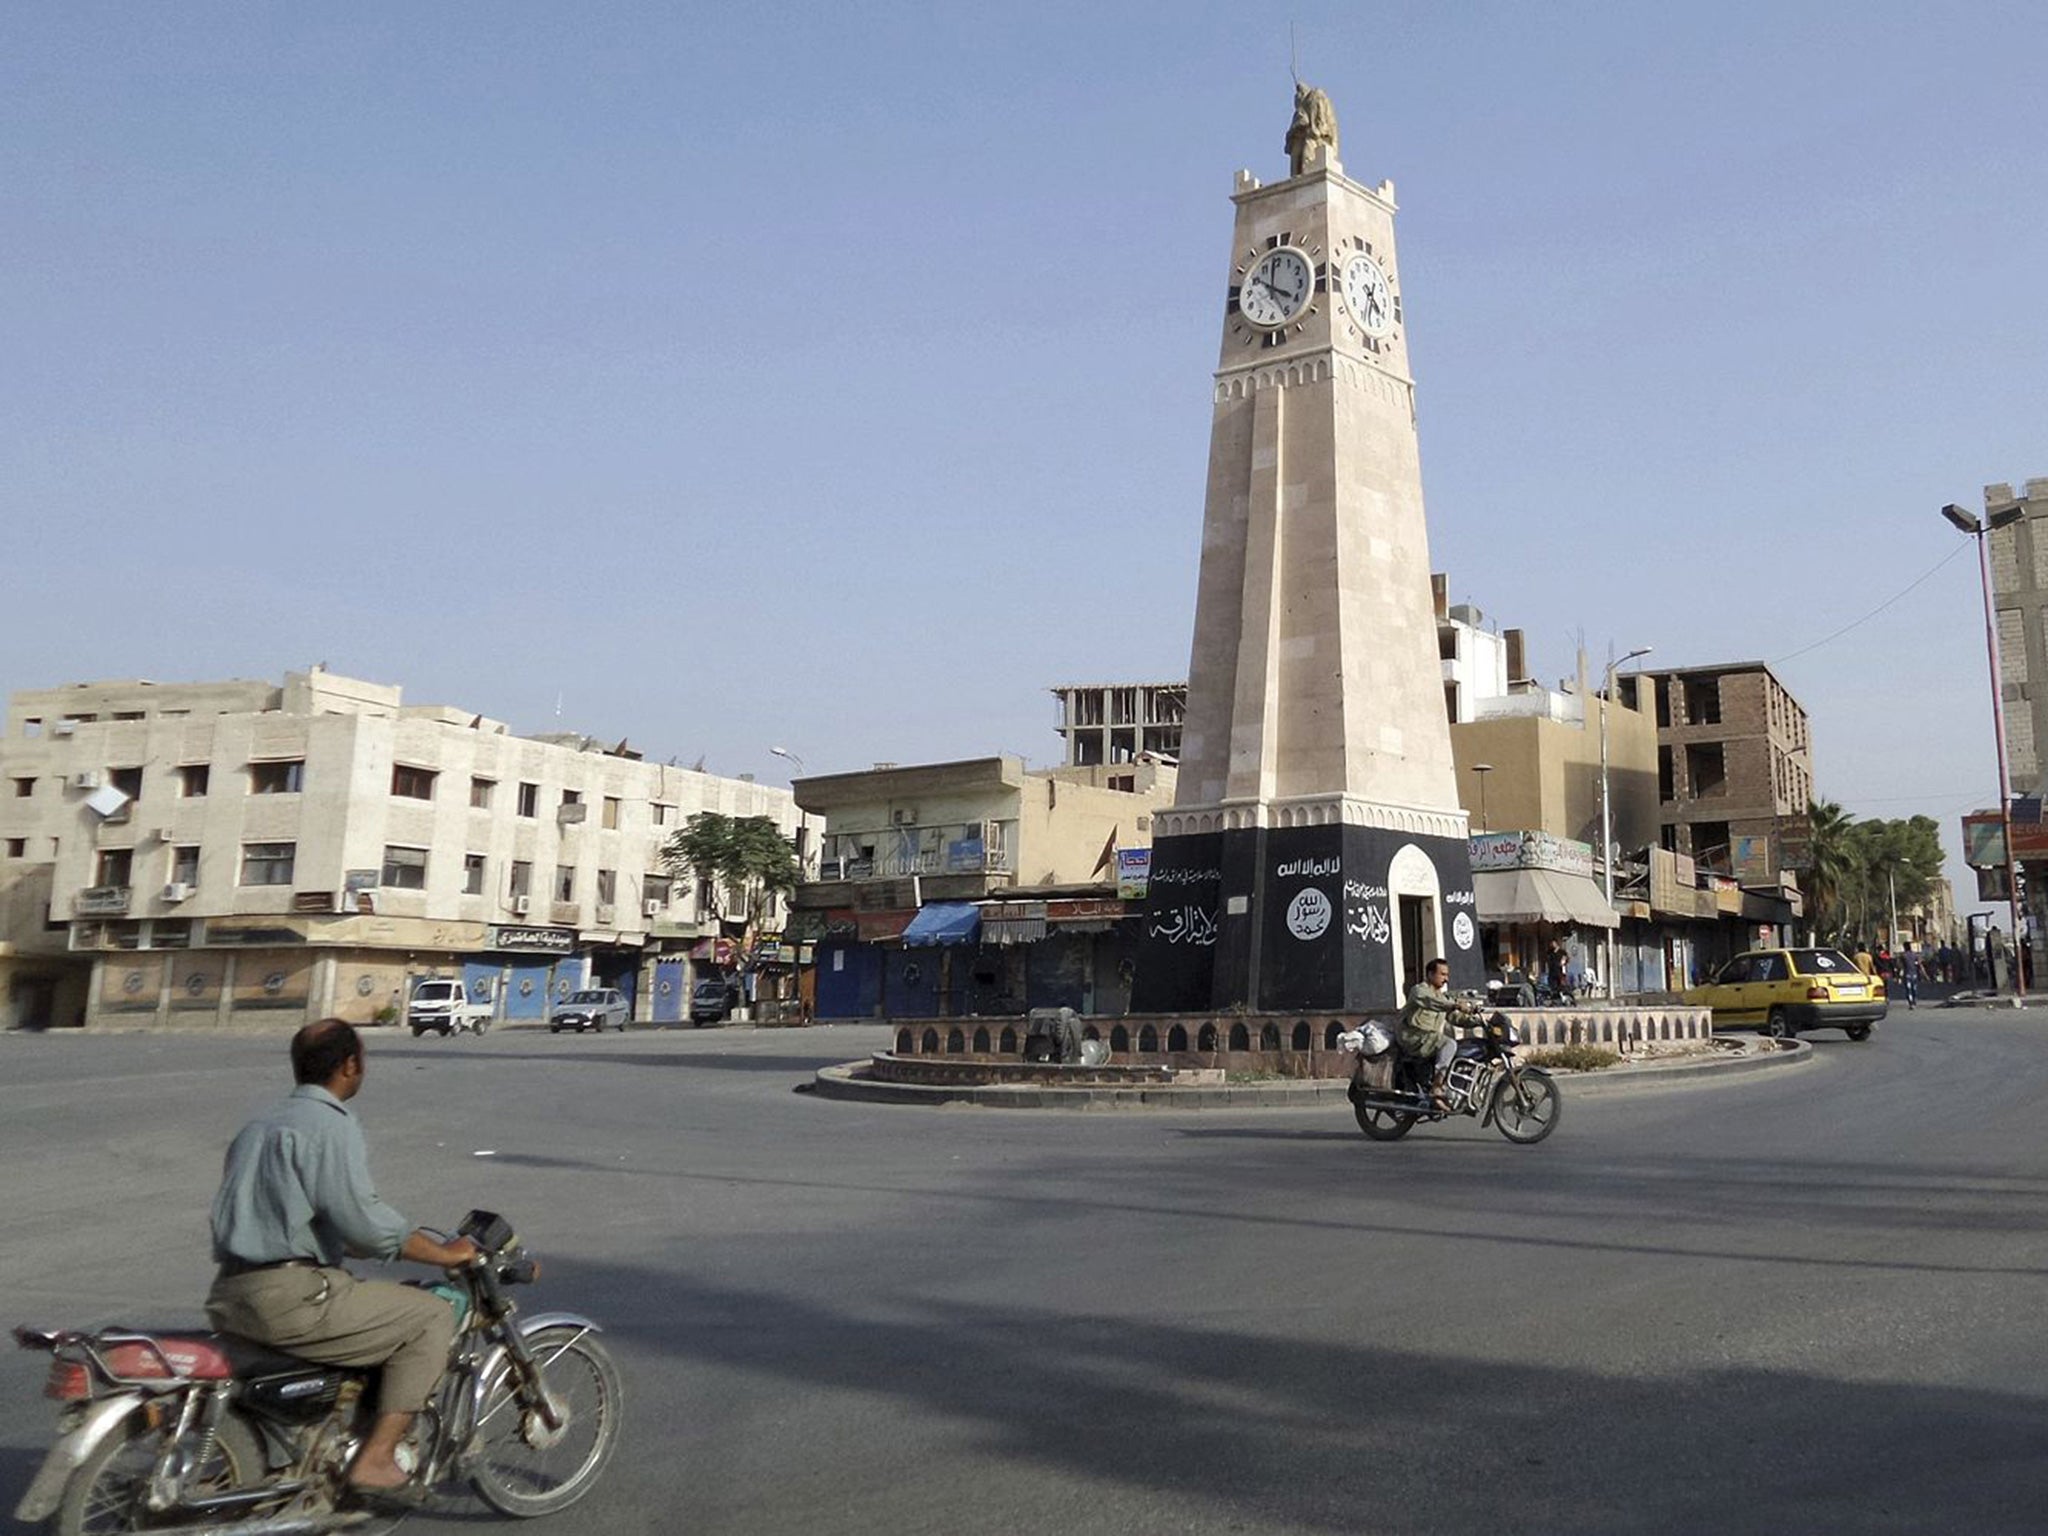 Mohammed Emwazi was killed near Clocktower Square in Raqqa, site of Isis public executions